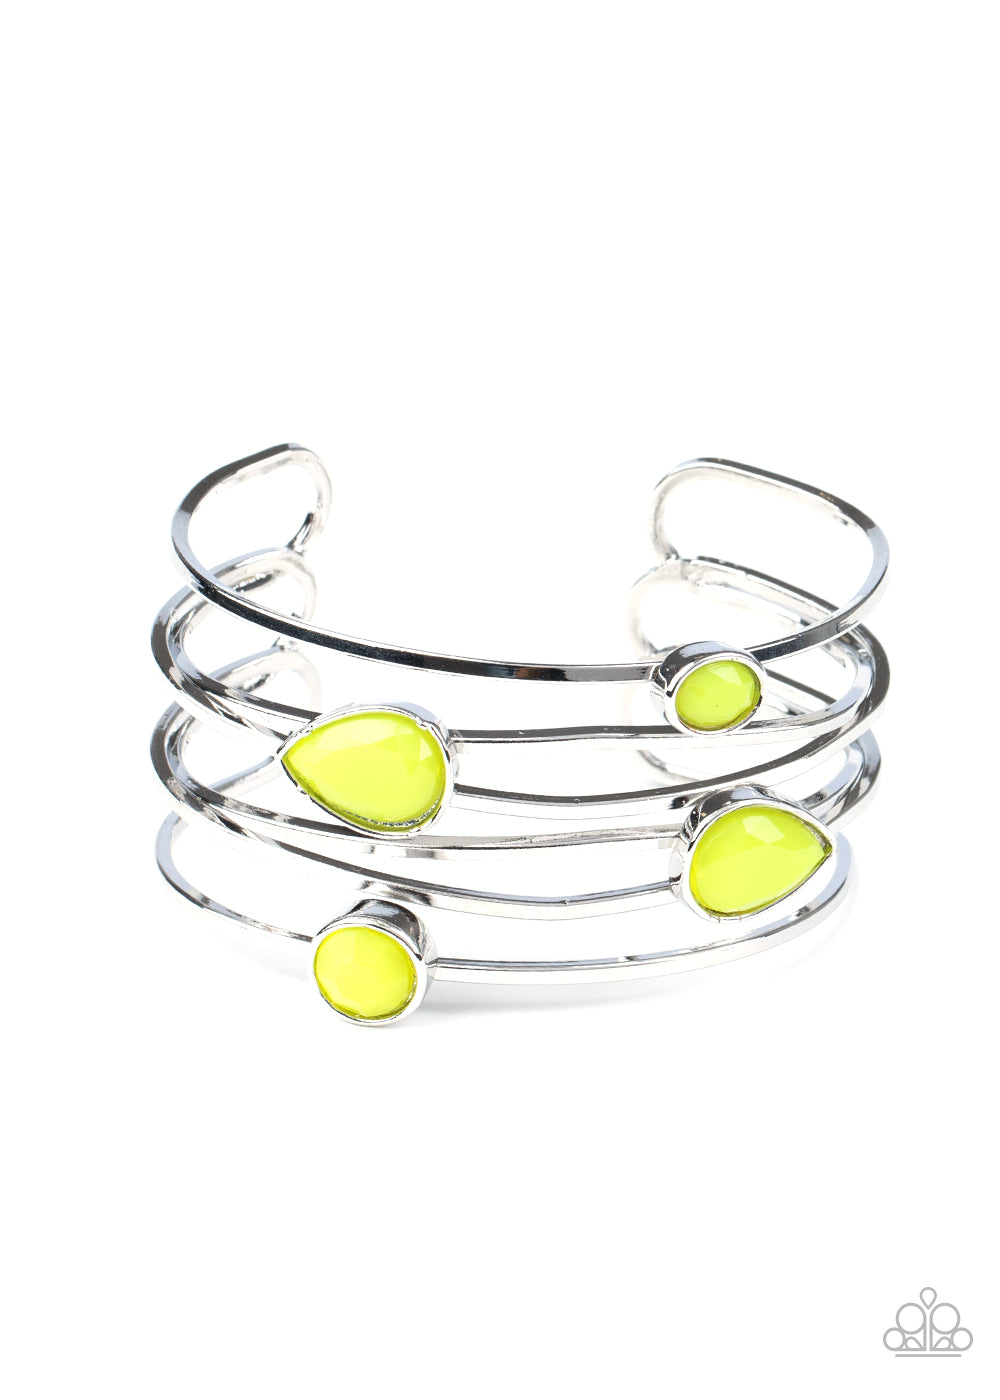 Paparazzi Accessories bracelet, a neon collection of faceted yellow beads haphazardly dot the tops of imperfect crisscrossing silver bars, coalescing into a colorfully retro cuff around the wrist.